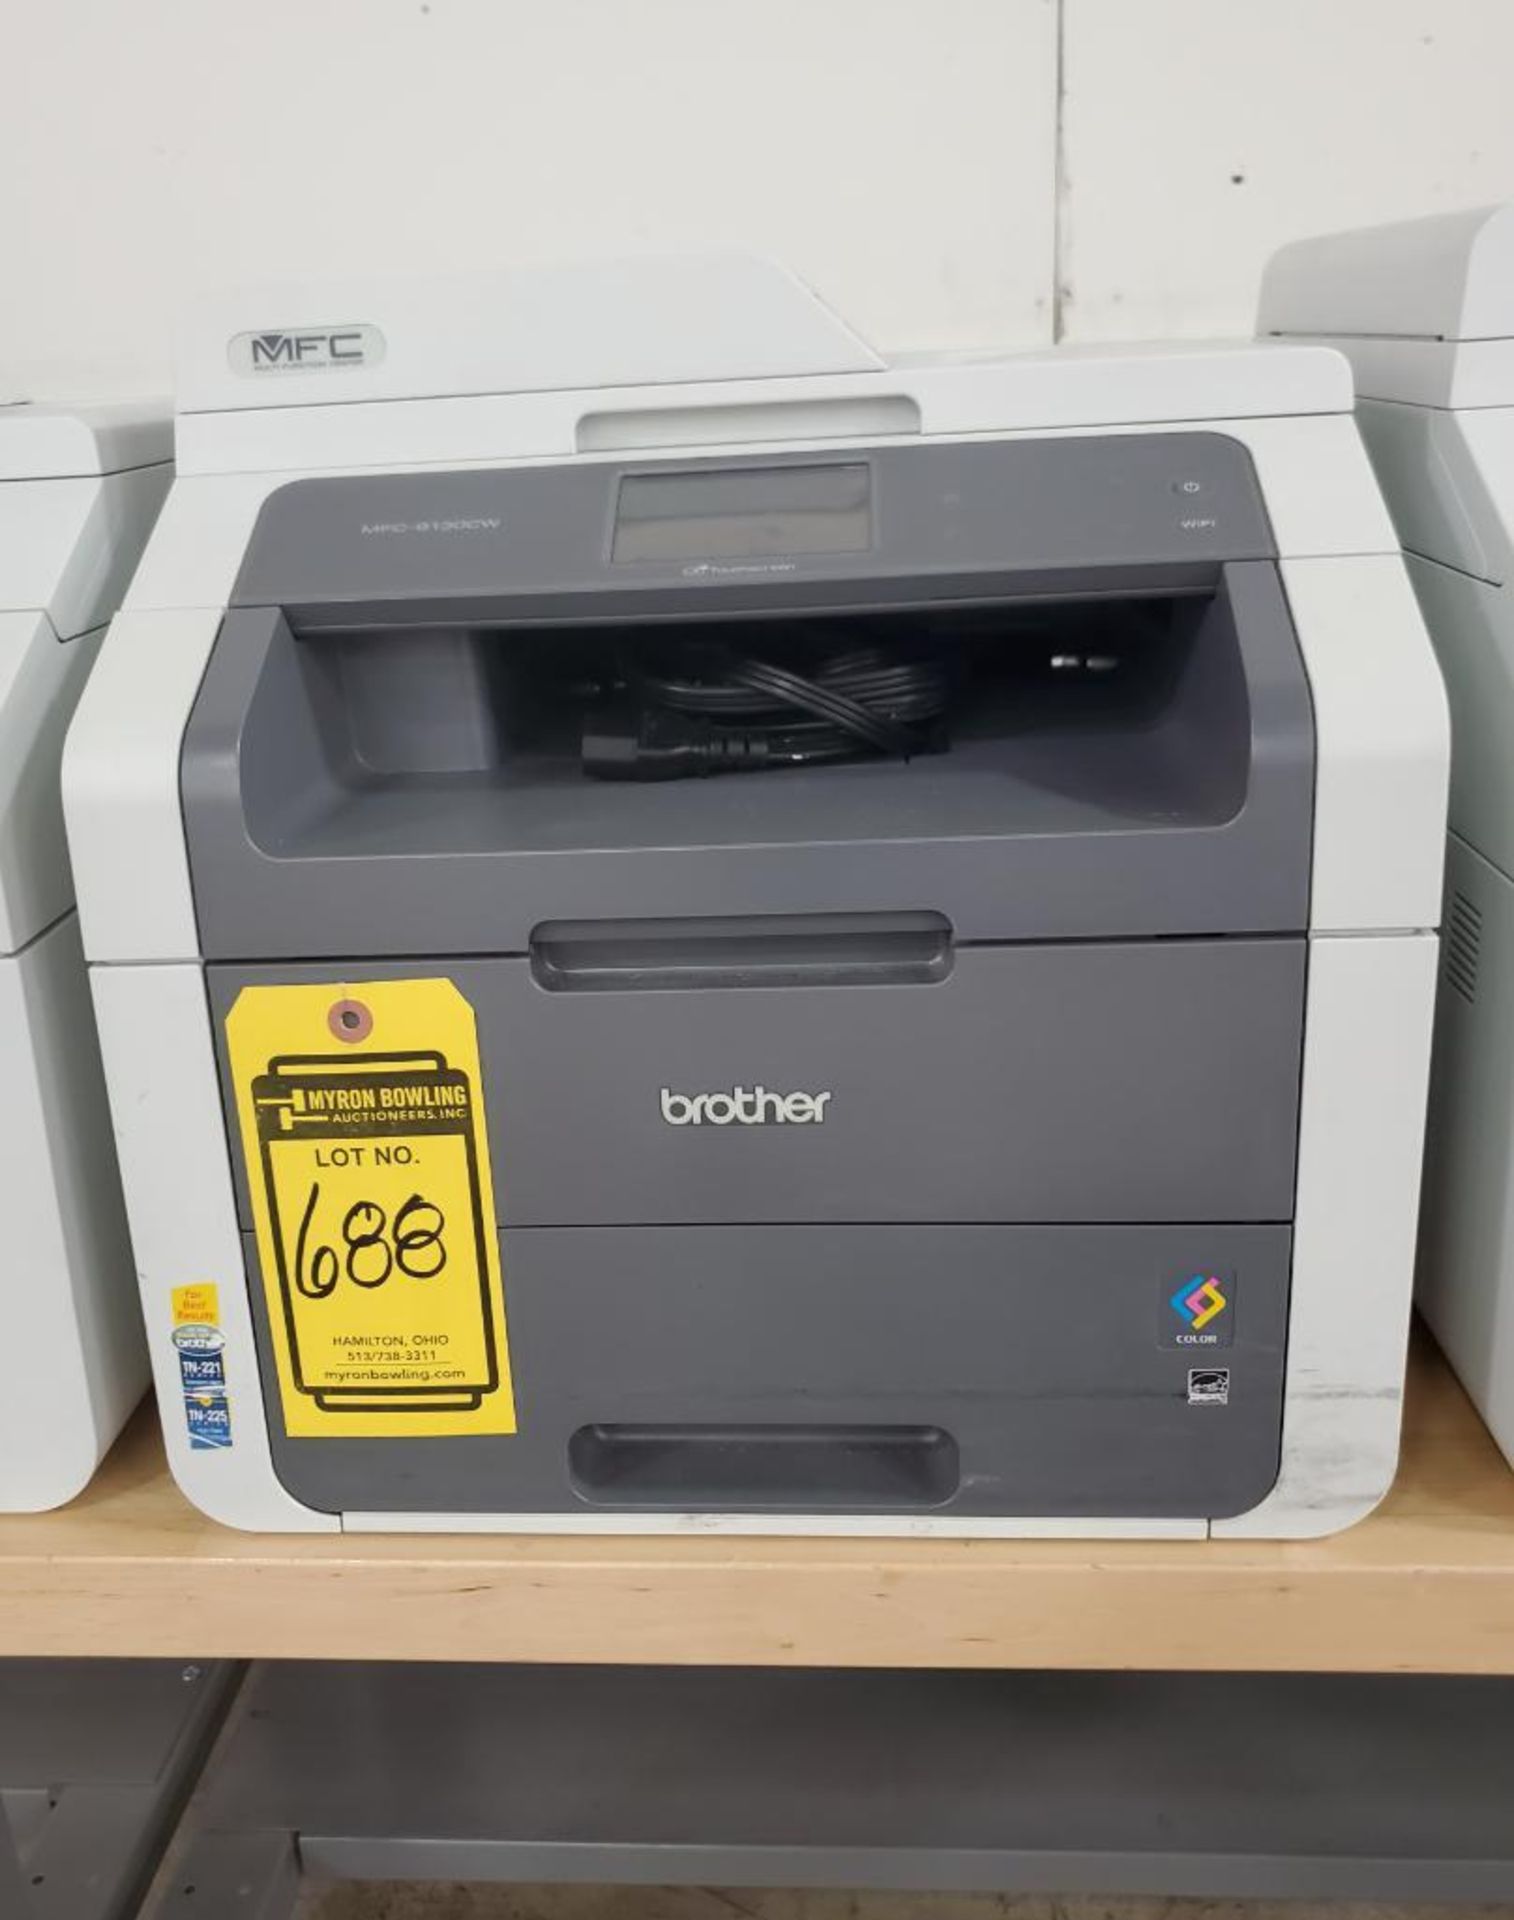 BROTHERS MULTI-FUNCTION CENTER PRINTER; MODEL MFC-9130CW